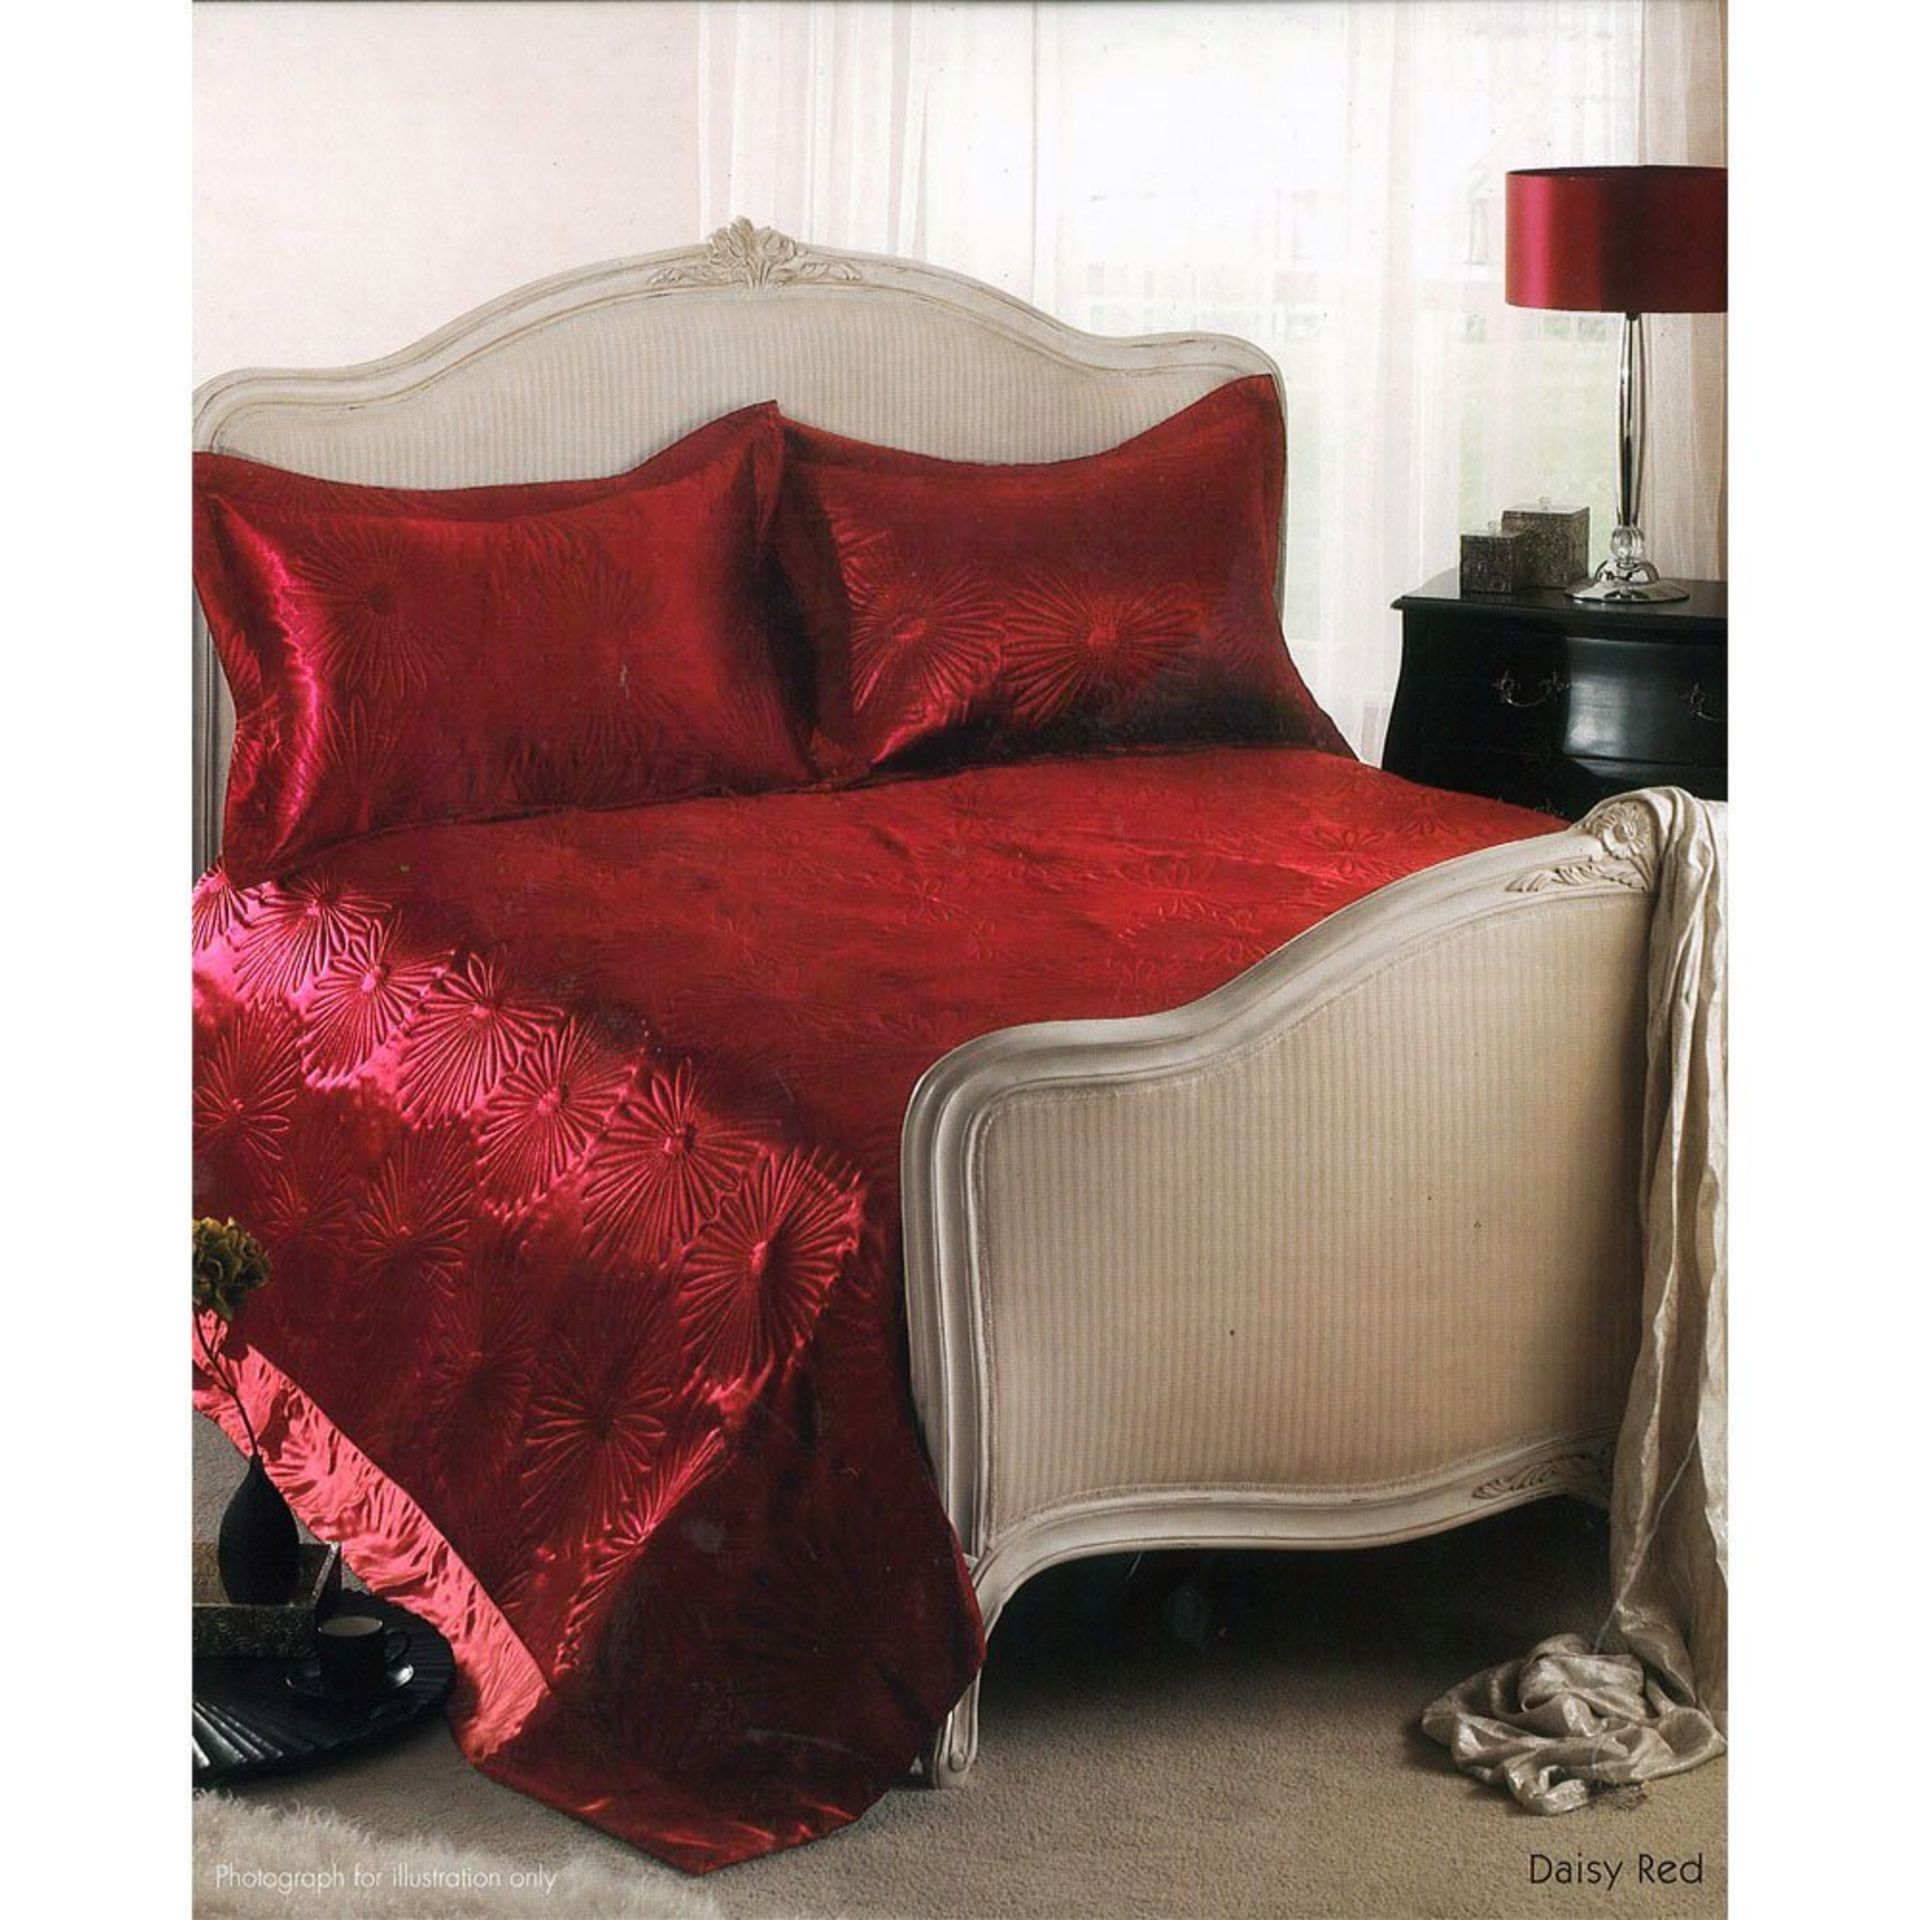 Embossed Daisy Red Satin Bed Spread Throw Pillow Cases